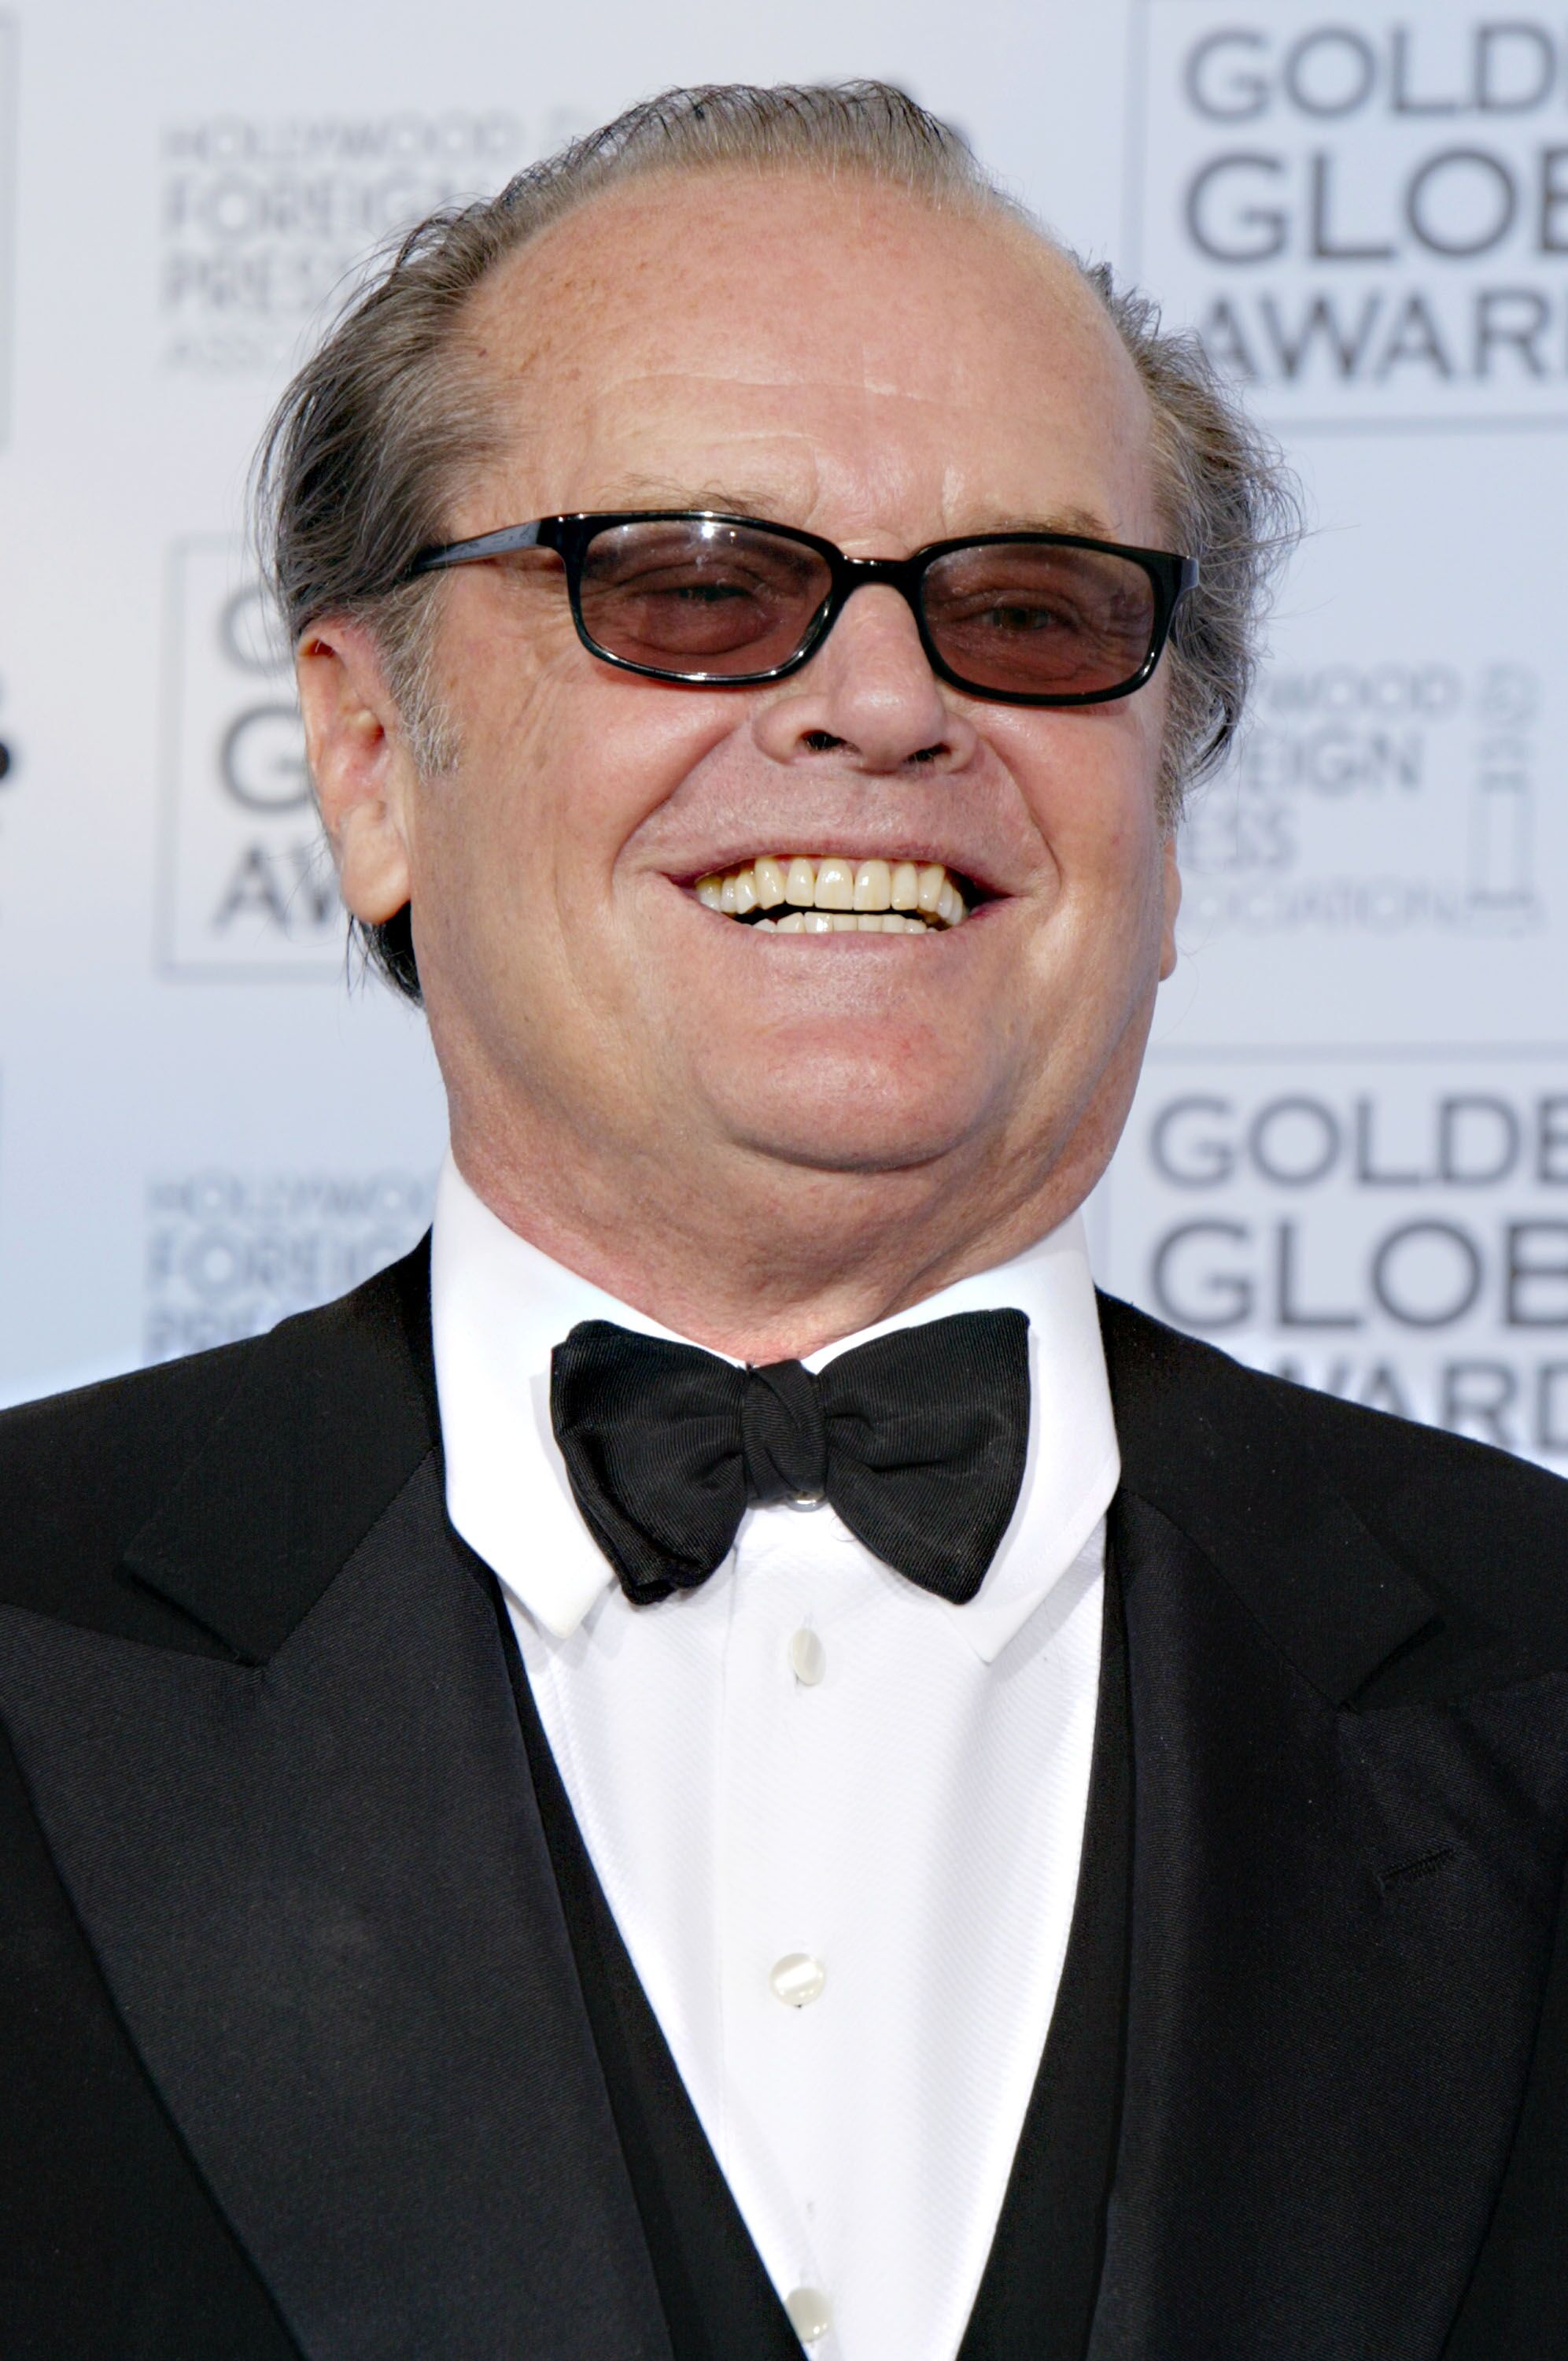 Jack Nicholson at the 61st Annual Golden Globe Awards. | Source: Getty Images